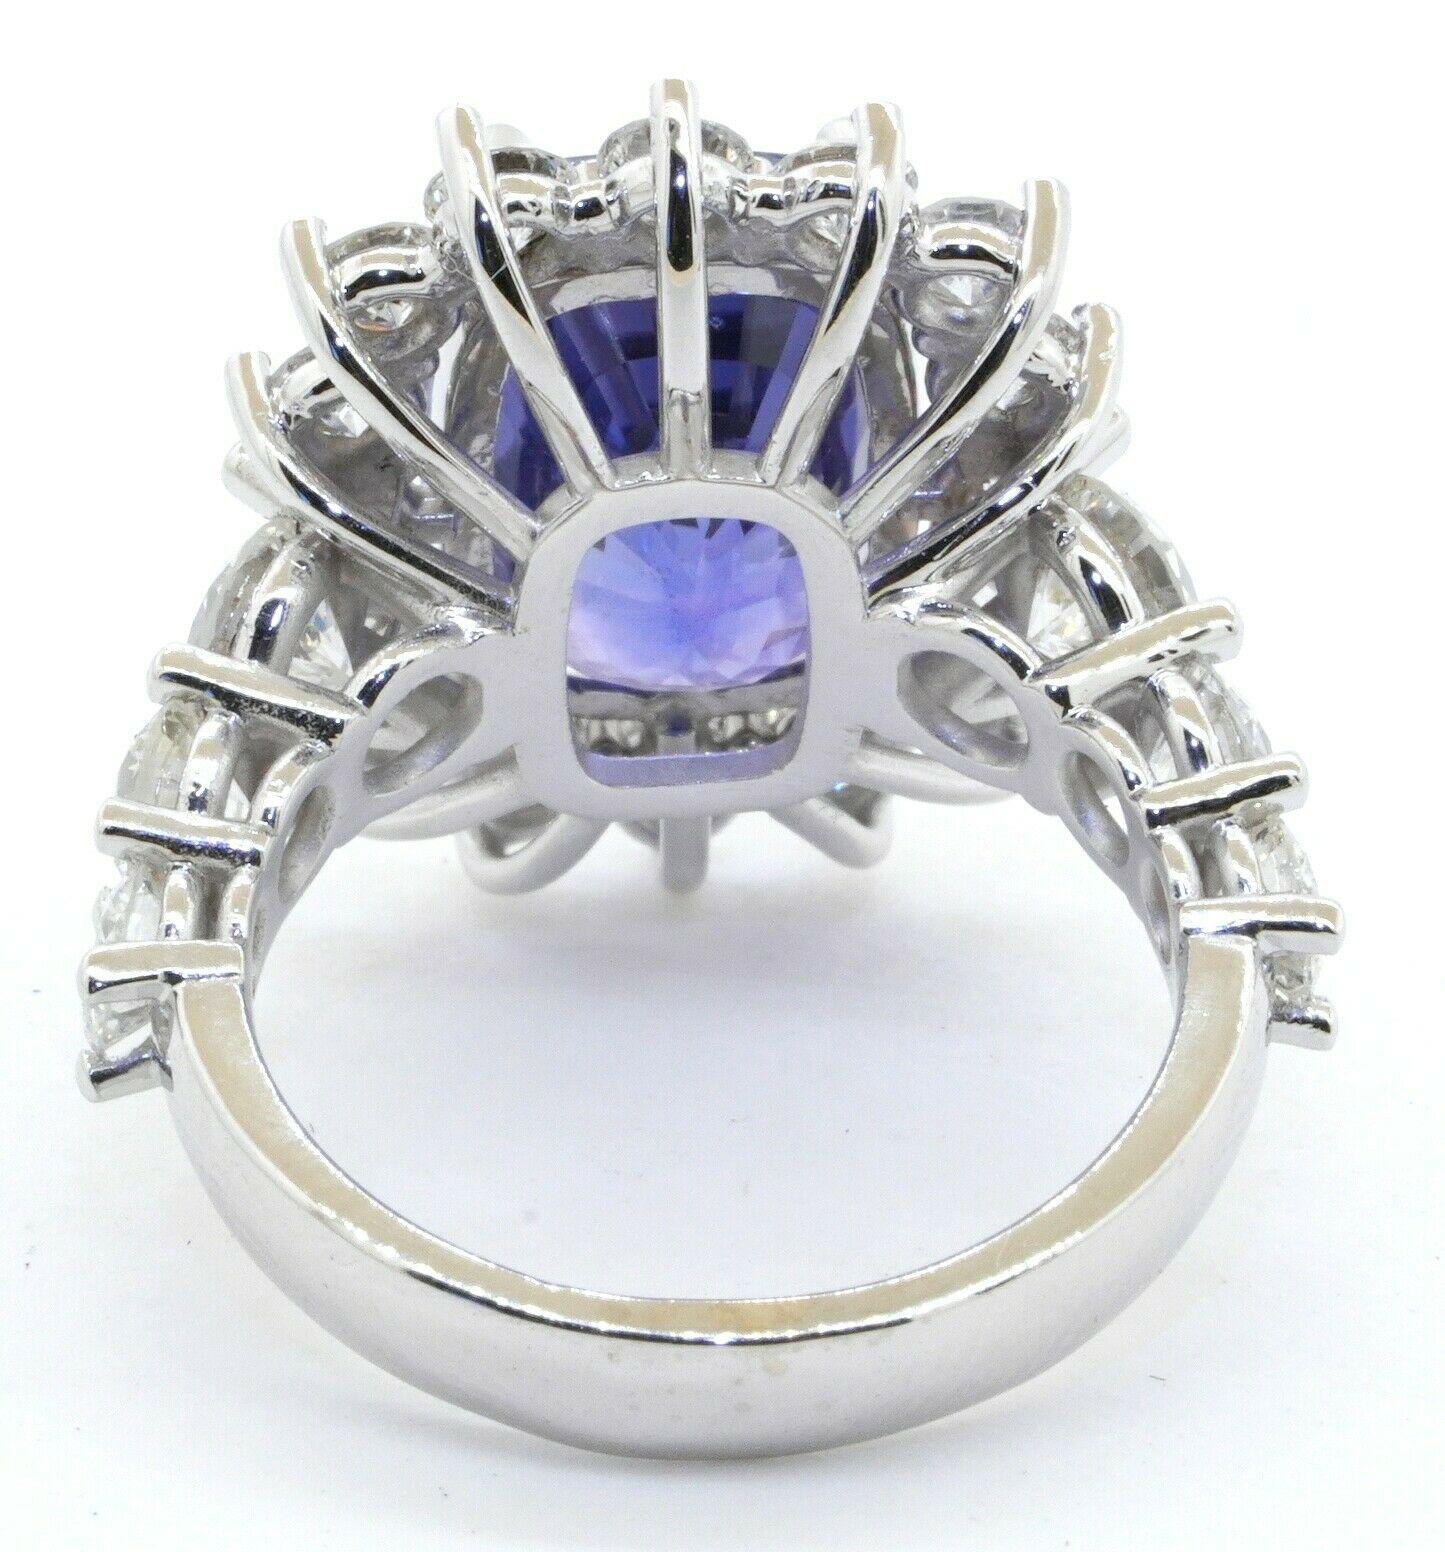 GIA heavy 18K WG 13.69CTW VS diamond/No Heat Ceylon sapphire cocktail ring size 7. This extraordinary piece of jewelry is crafted in beautiful 18K white gold and features a GIA certified genuine natural approx. 10.16CT (14.19 X 9.55 X 7.75mm)